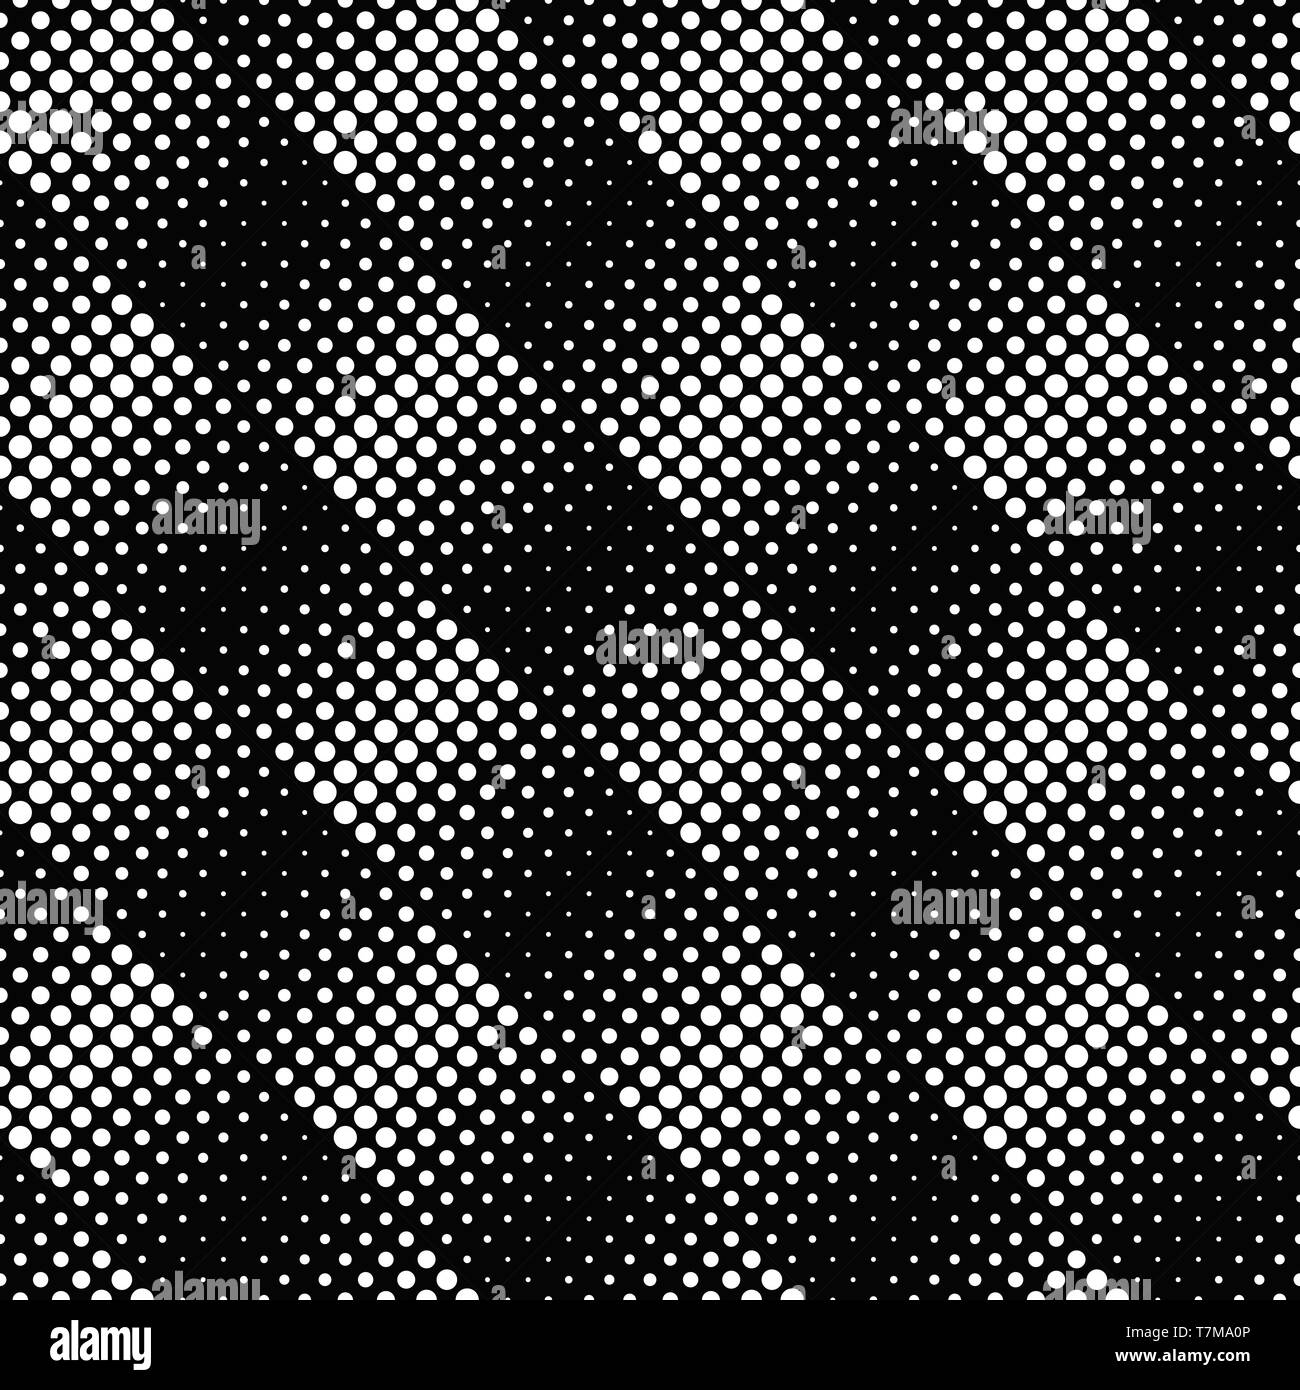 Black and white geometrical dot pattern background Stock Vector